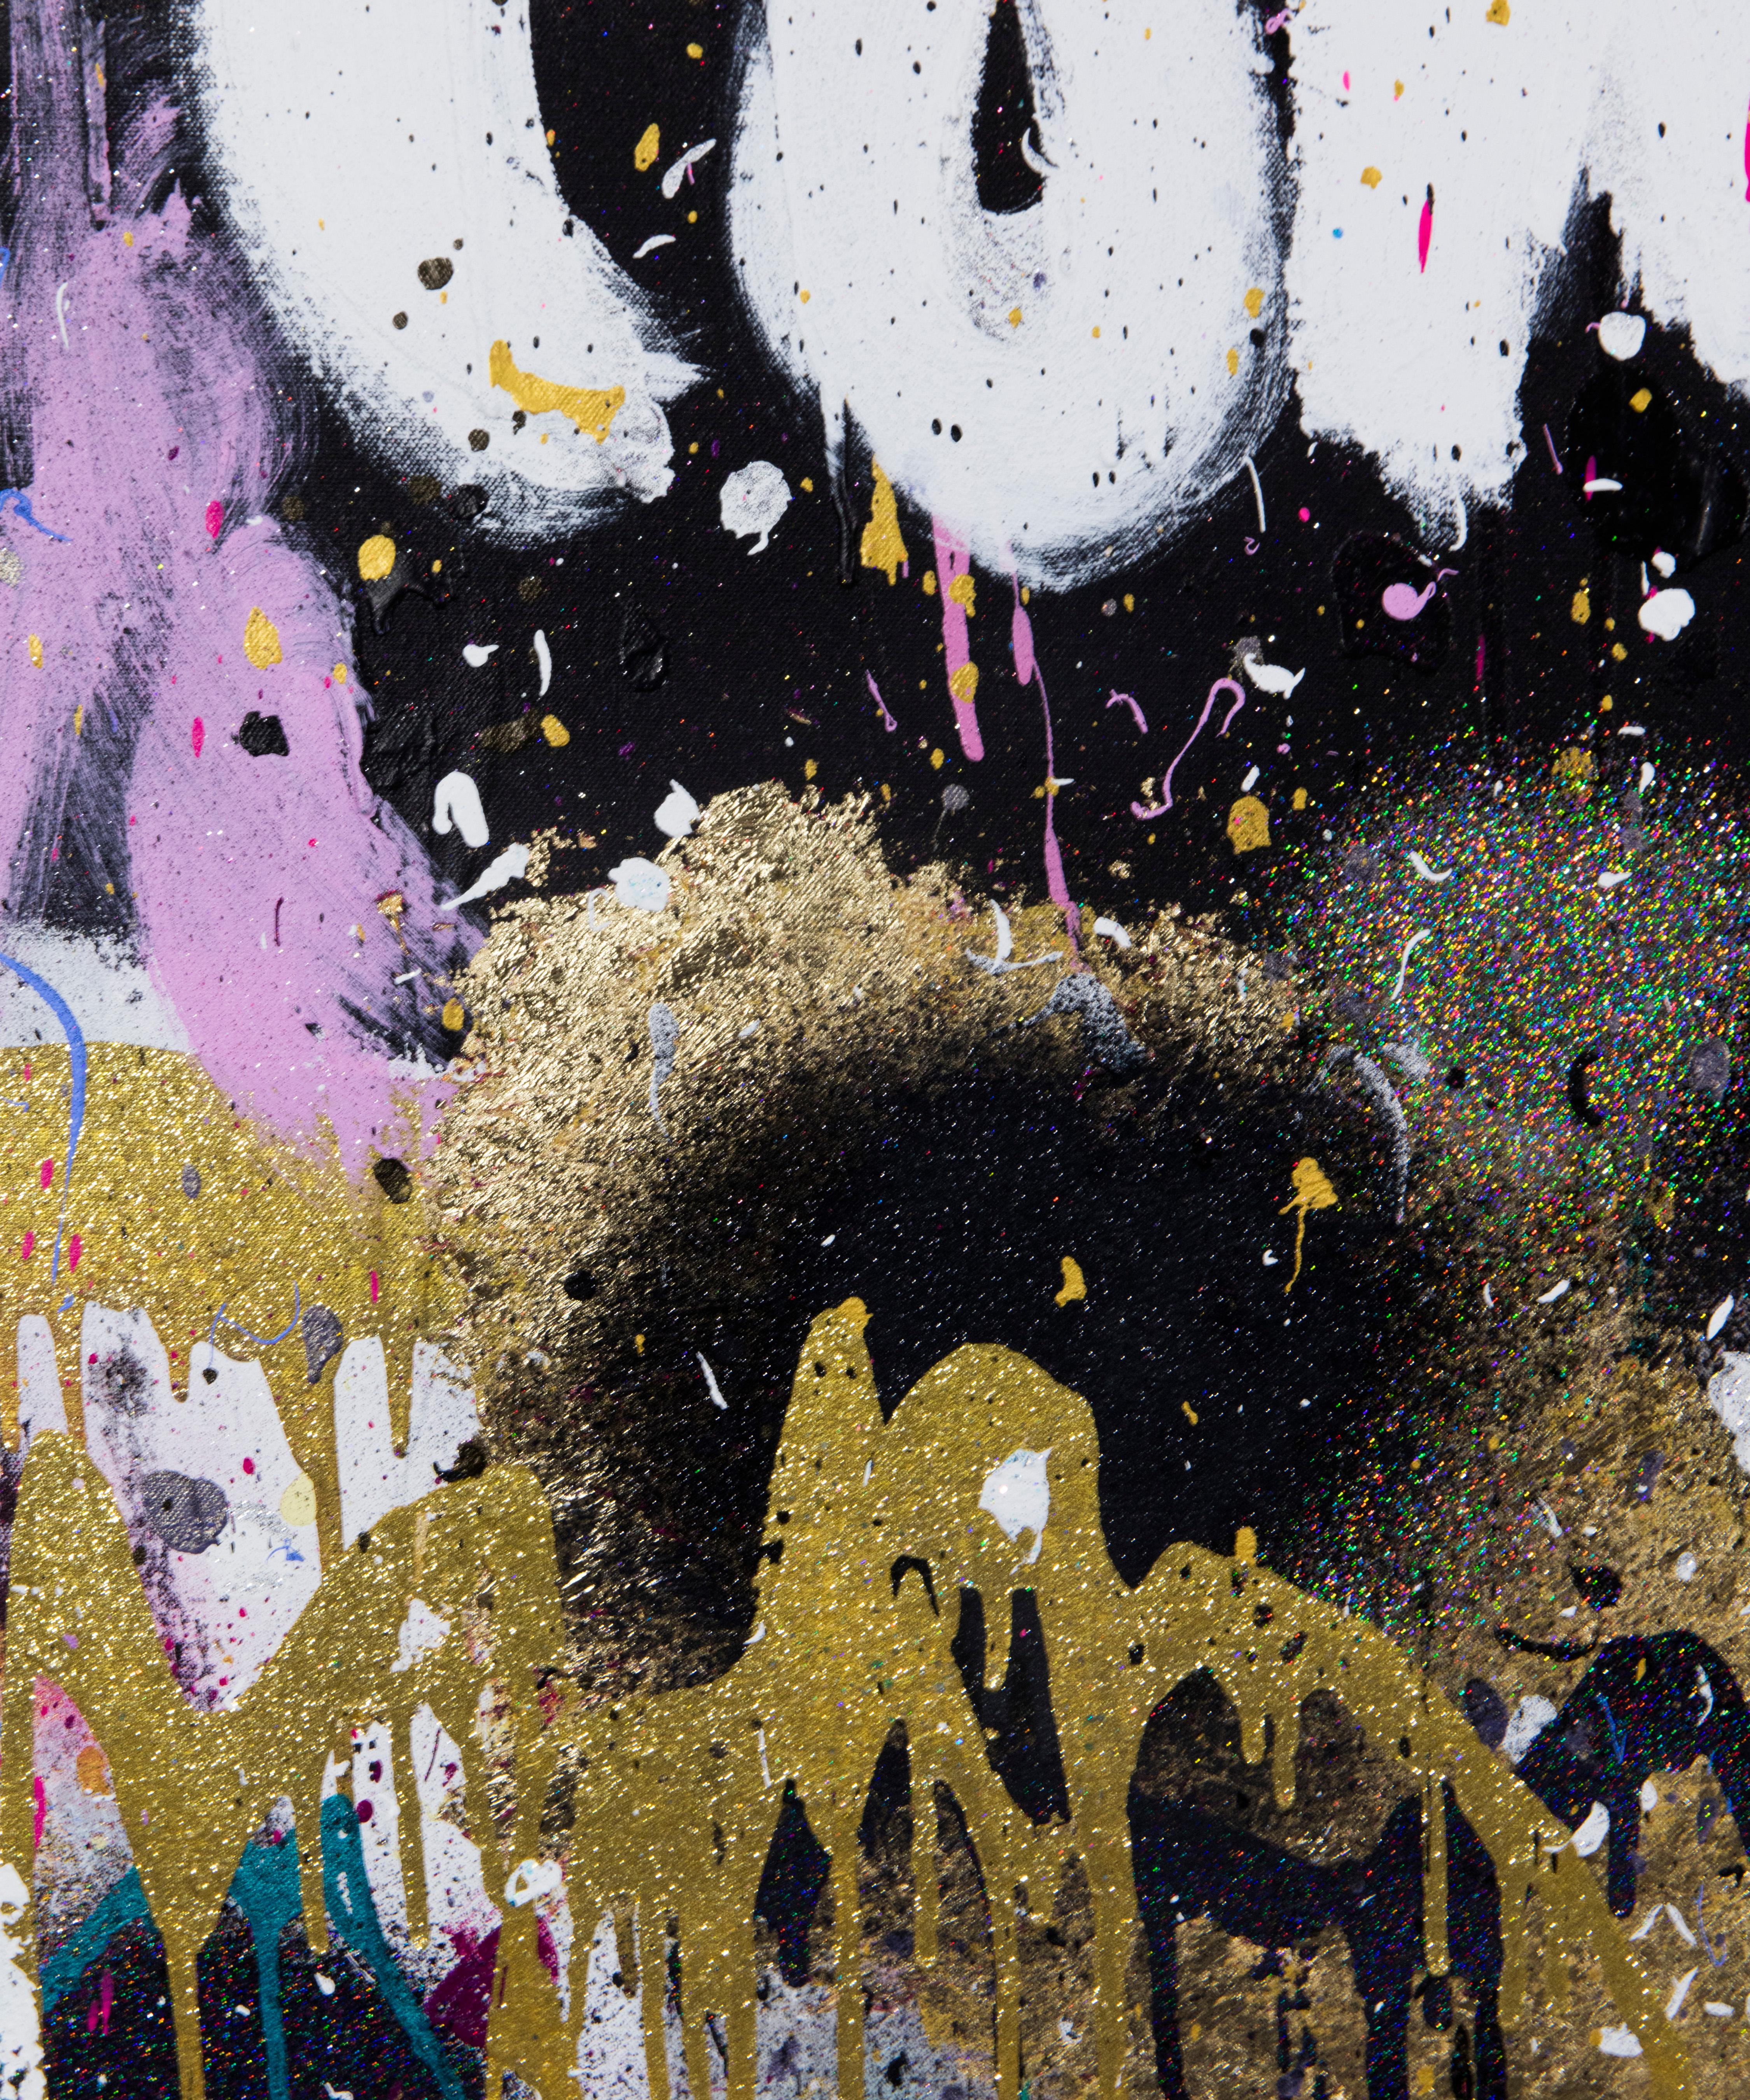 Jeremy Brown
Come rain or come shine
Acrylic, ink, glitter, gold leaf and oil stick on canvas
64 x 46 inches